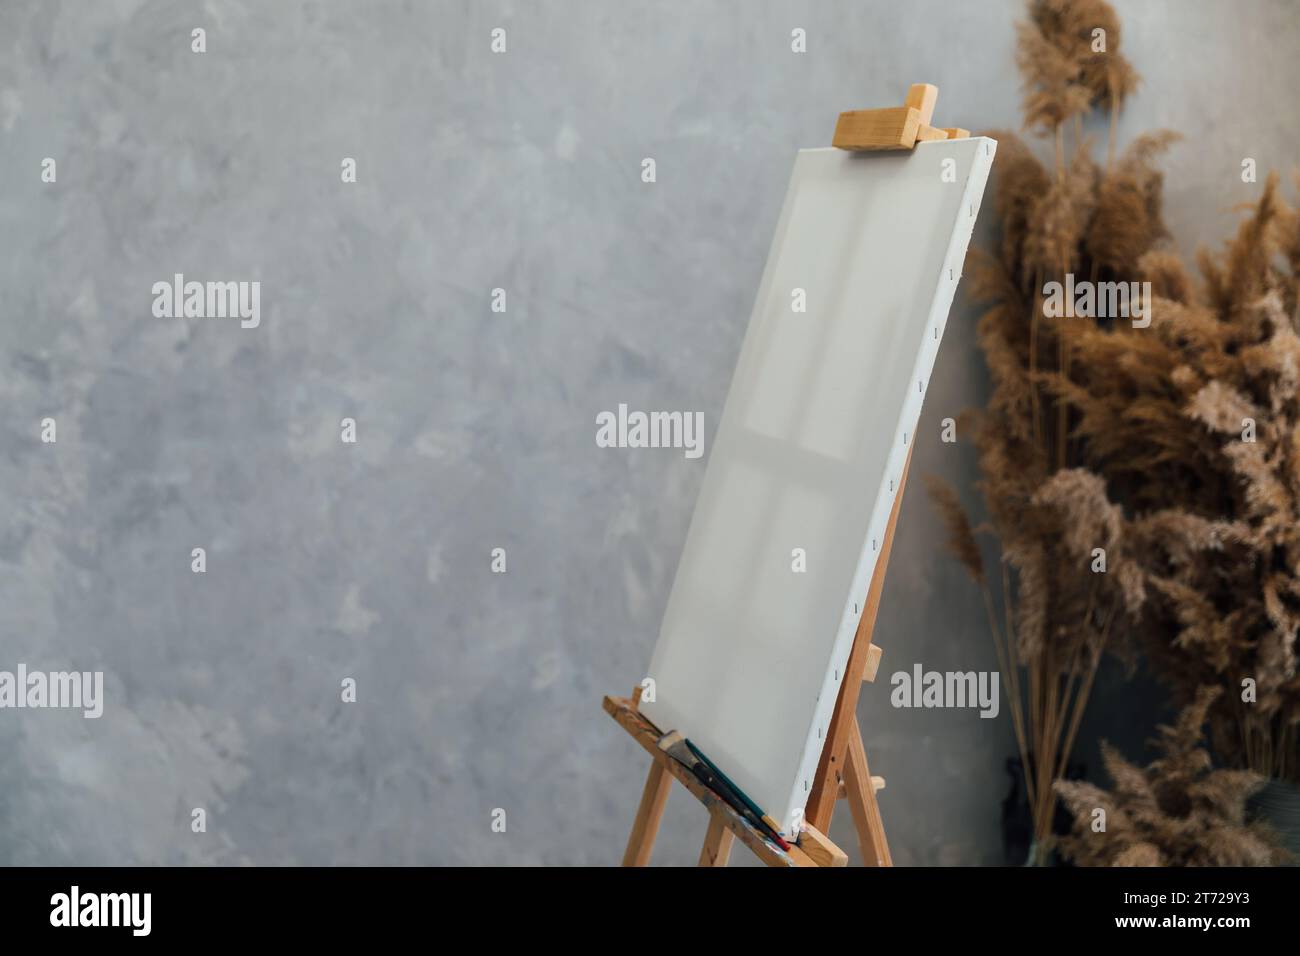 easel with white canvas stands on a gray background with brown flowers Stock Photo